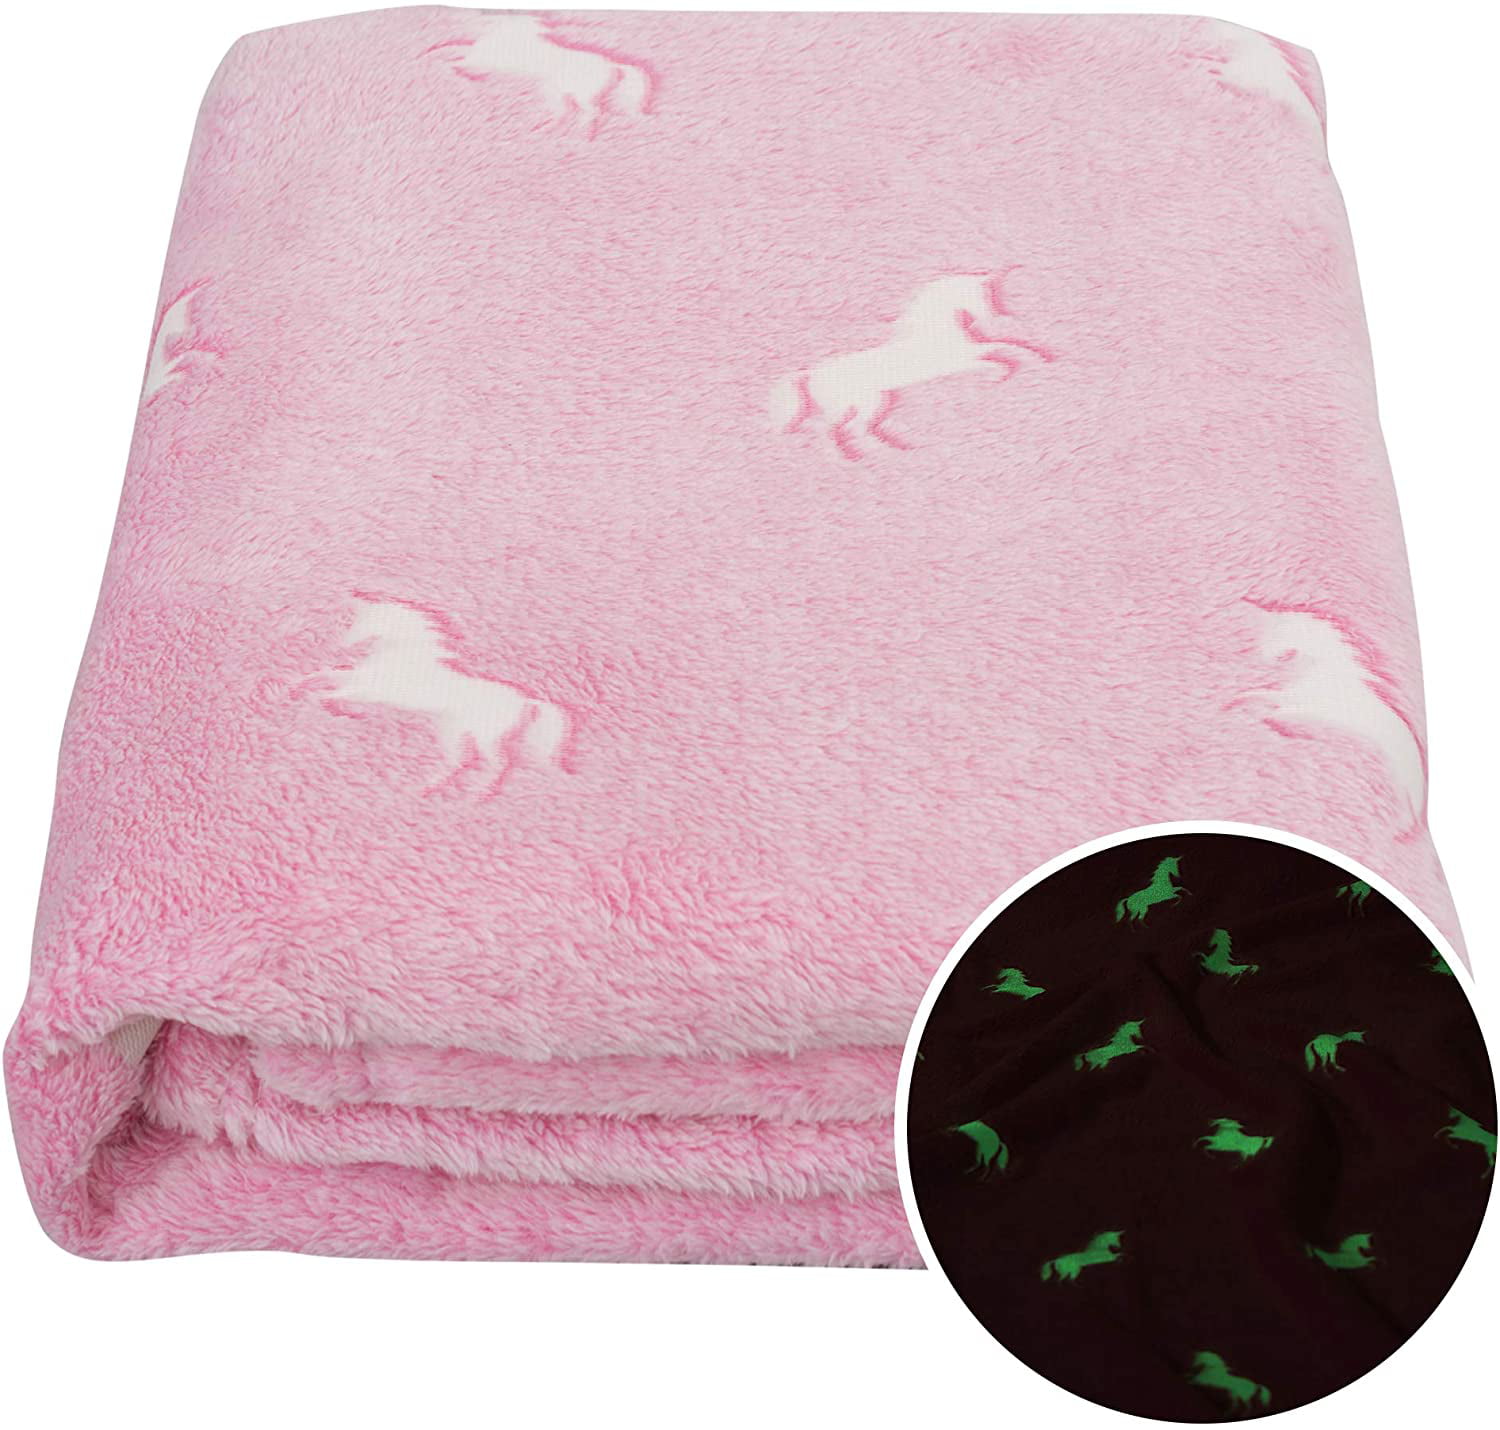 Super Soft Fuzzy Plush Fleece,Decorated with Sta Details about   Glow in The Dark Throw Blanket 